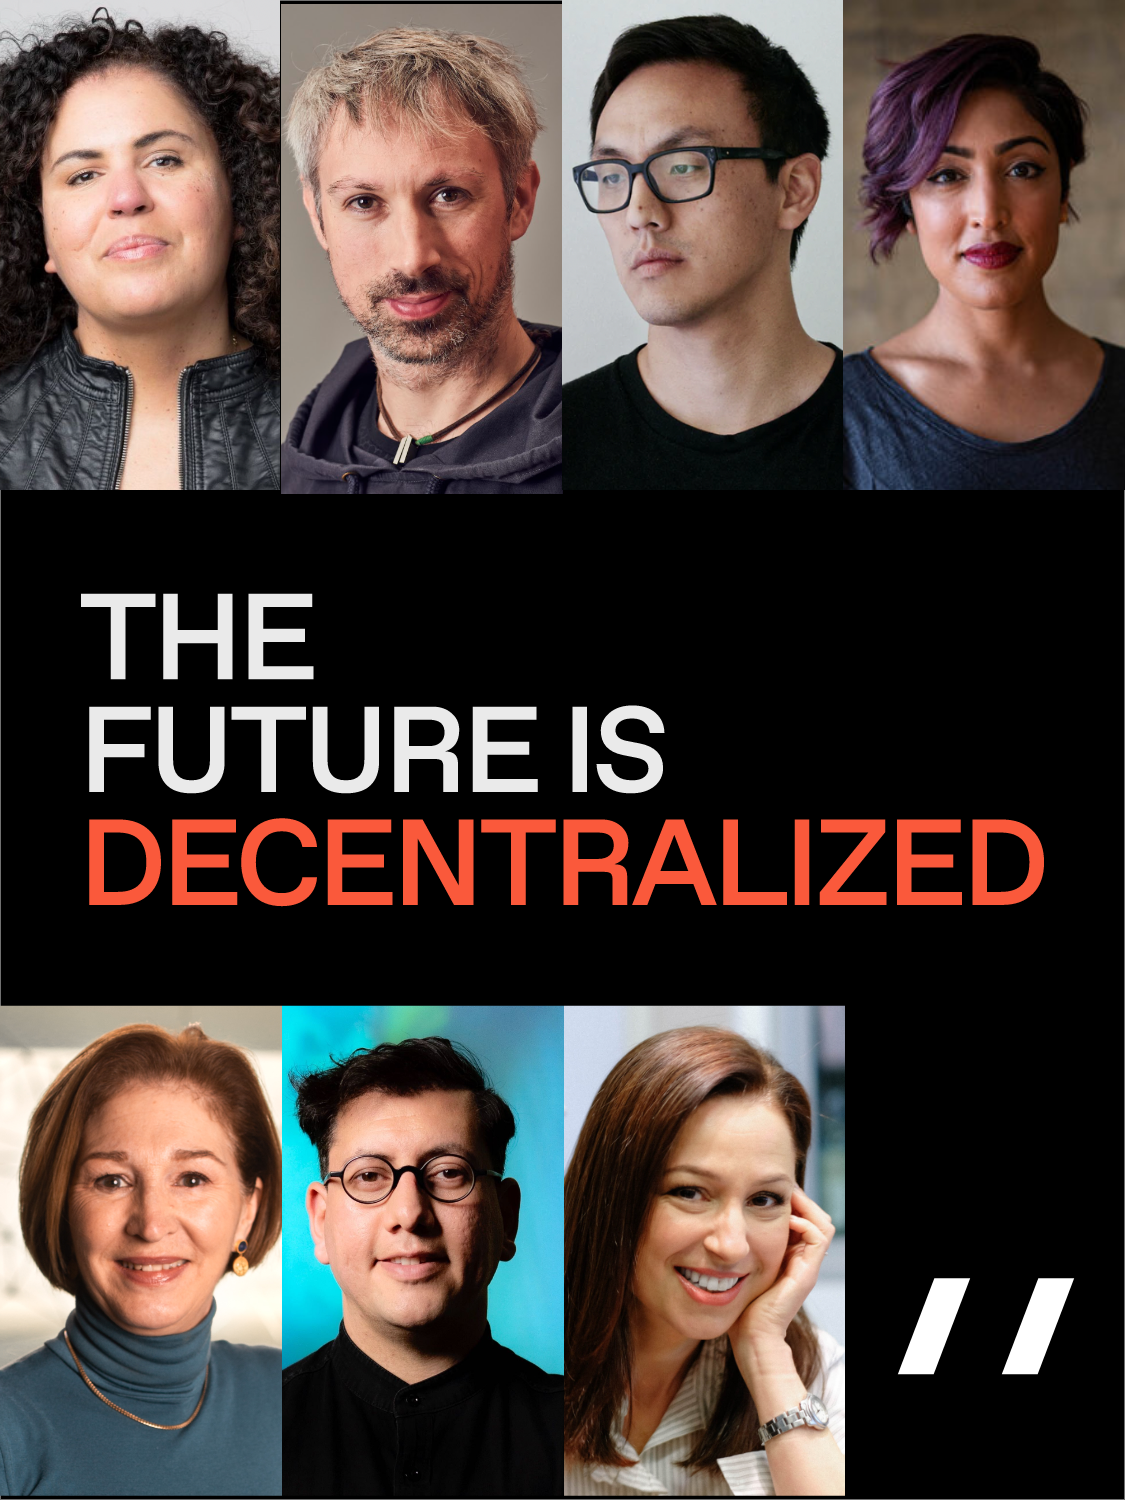 Two rows of headshots of artists and thinkers with a text in between the rows reading "The Future is decentralized"